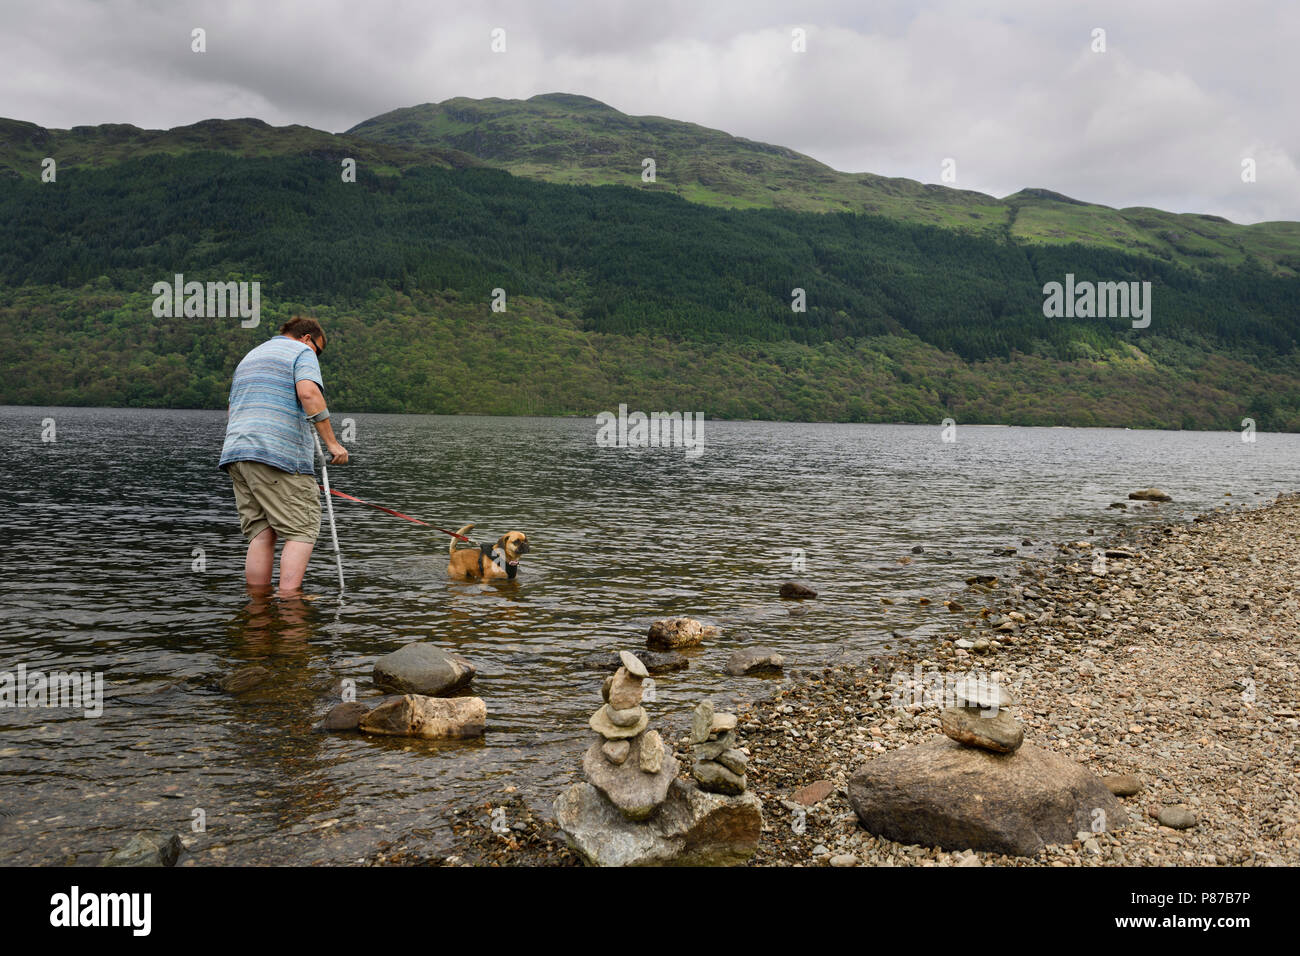 Convalescing man walking with crutch and dog on leash in Loch Lommond freshwater lake at Ben Lamond mountain Scotland UK Stock Photo